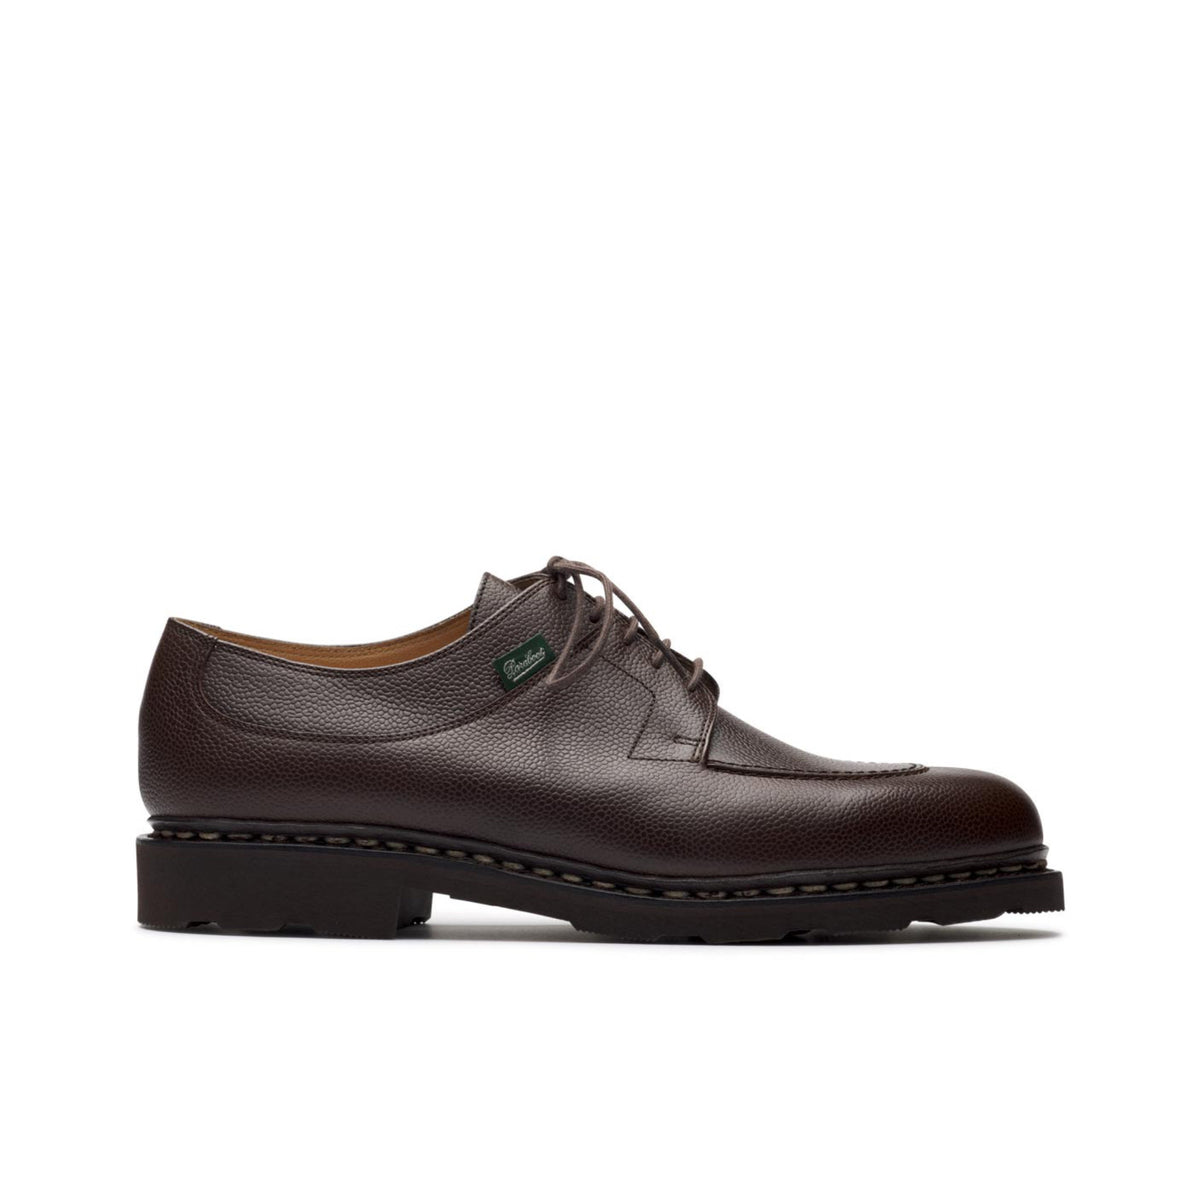 Paraboot Avignon Shoe - Graine Moka Paraboot : Find the Best Fit for Your  Needs